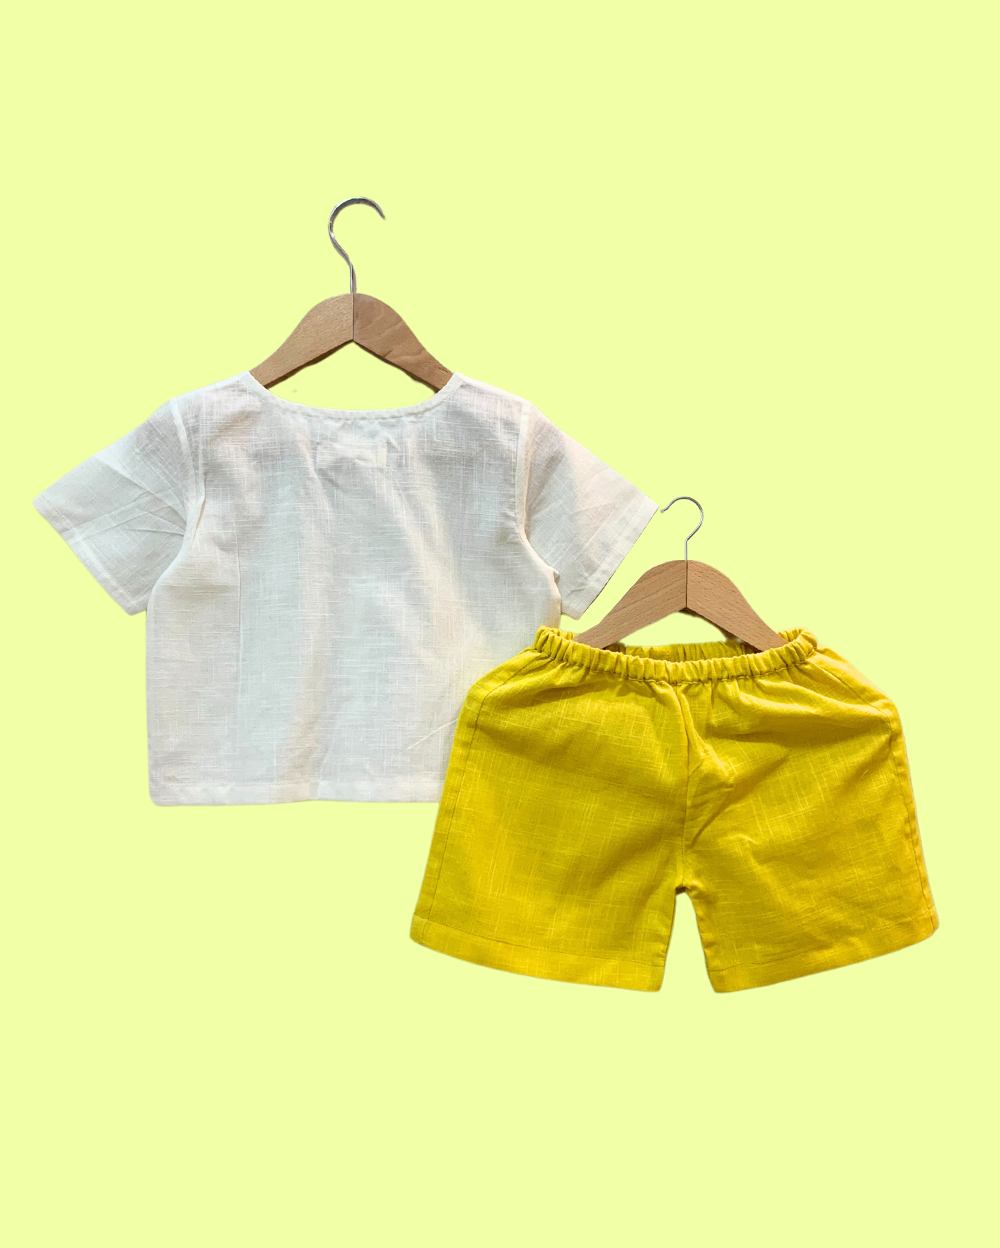 100% Organic Cotton White Top & Yellow Shorts Baby Set & Printed Frock for Baby Girls - 2 Piece Set